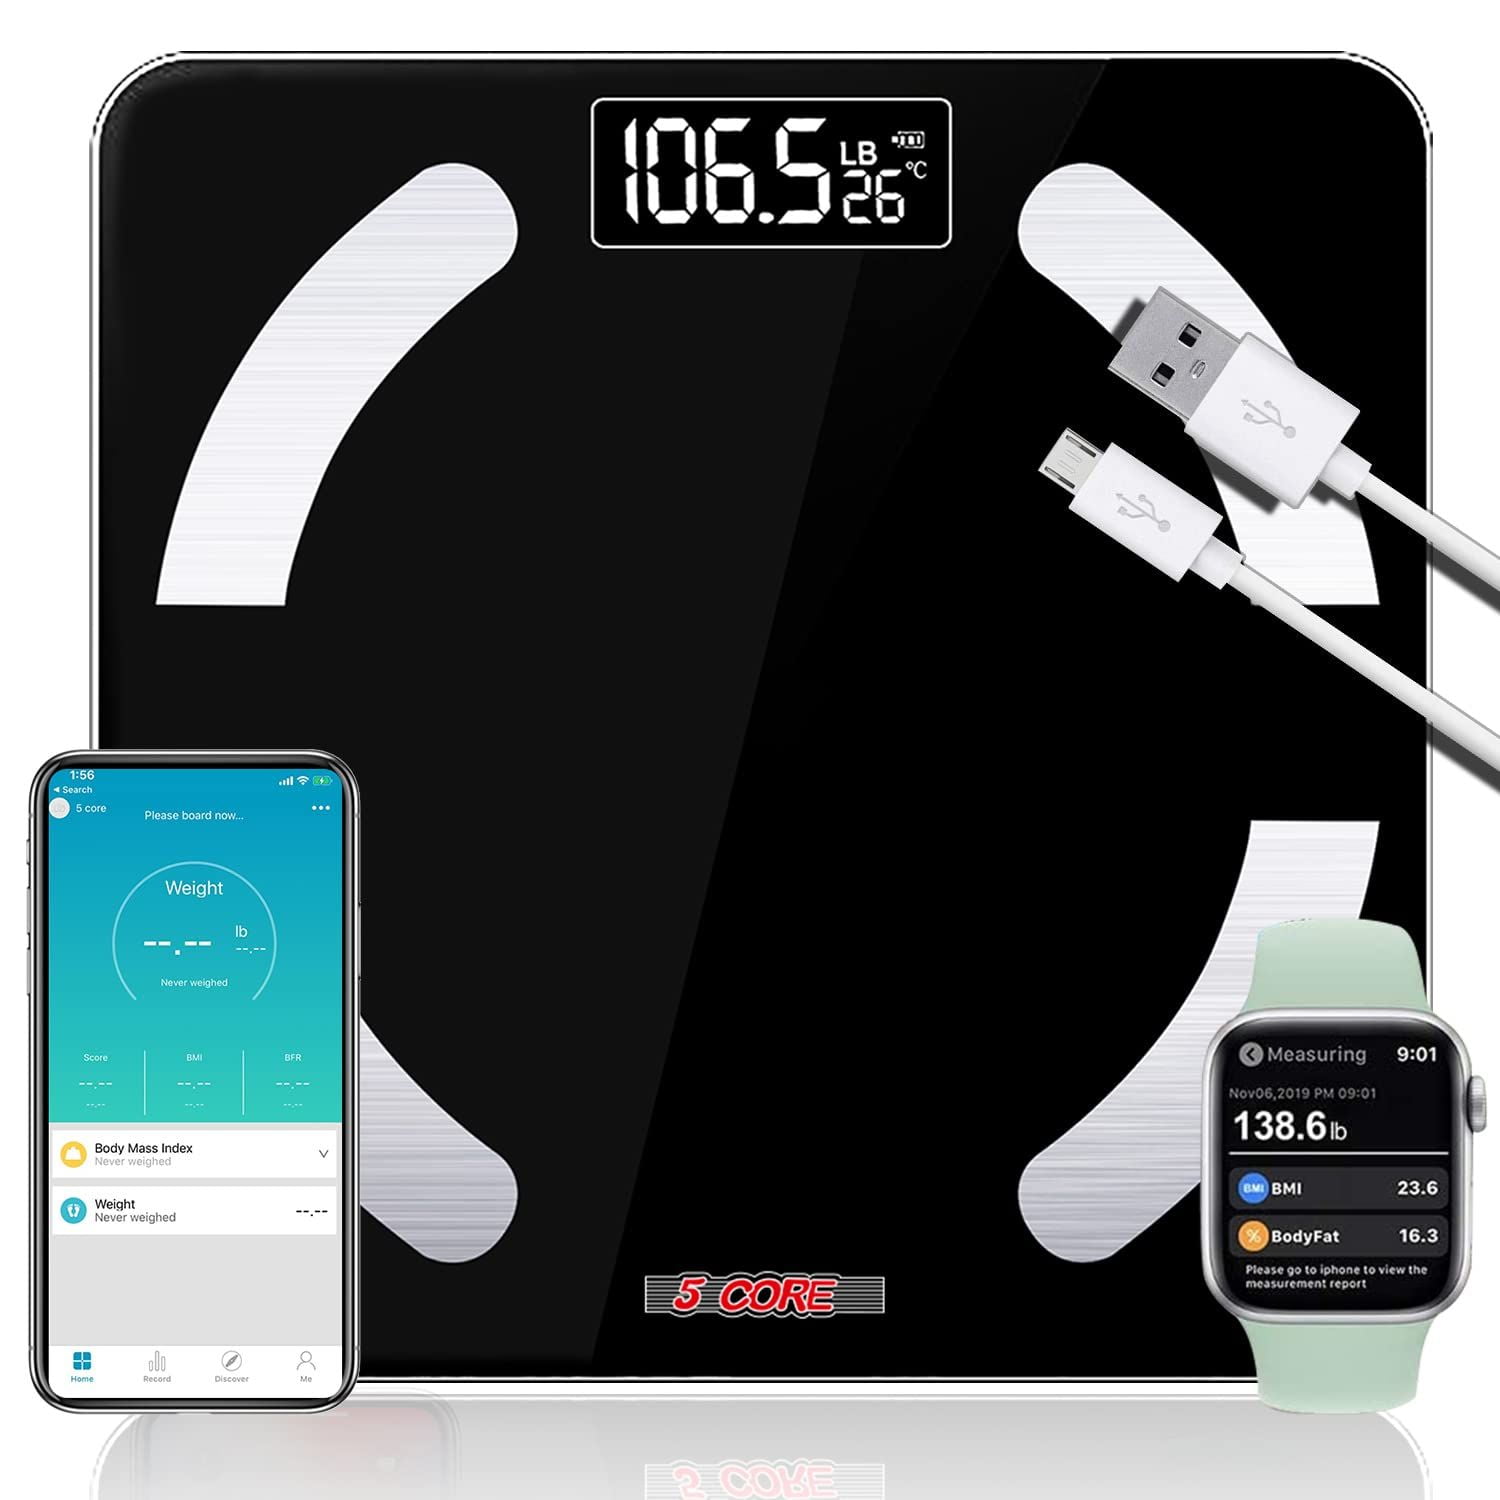 5 Core Rechargeable Smart Digital Bathroom Weighing Scale with Body Fat and  Water Weight for People, Bluetooth BMI Electronic Body Analyzer Machine,  400 lbs. BBS VL R BLU 